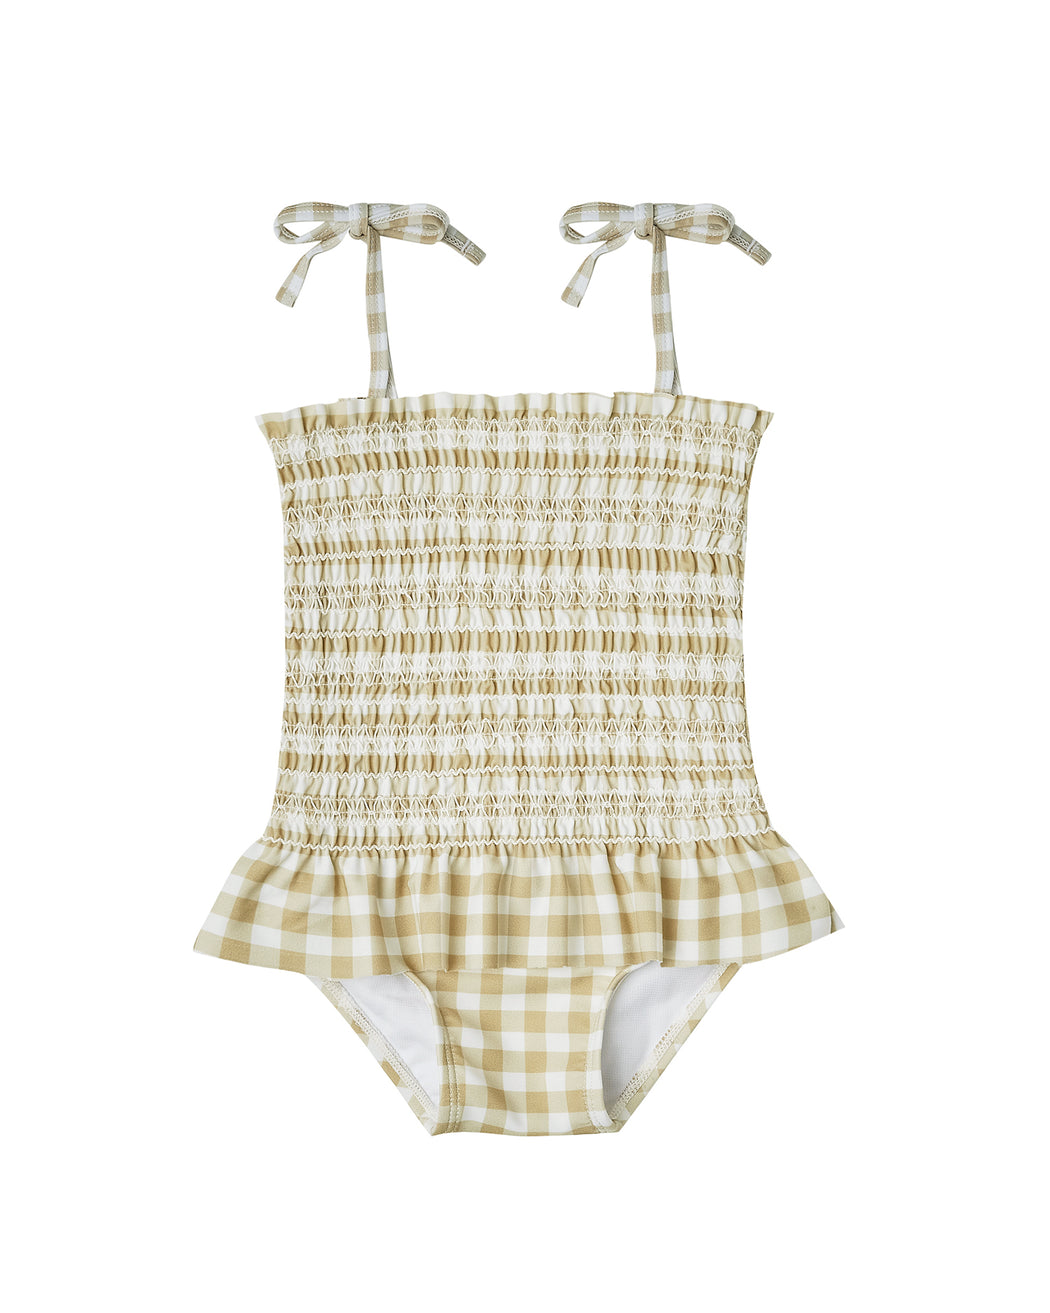 Smocked One Piece Swimsuit – Butter Gingham